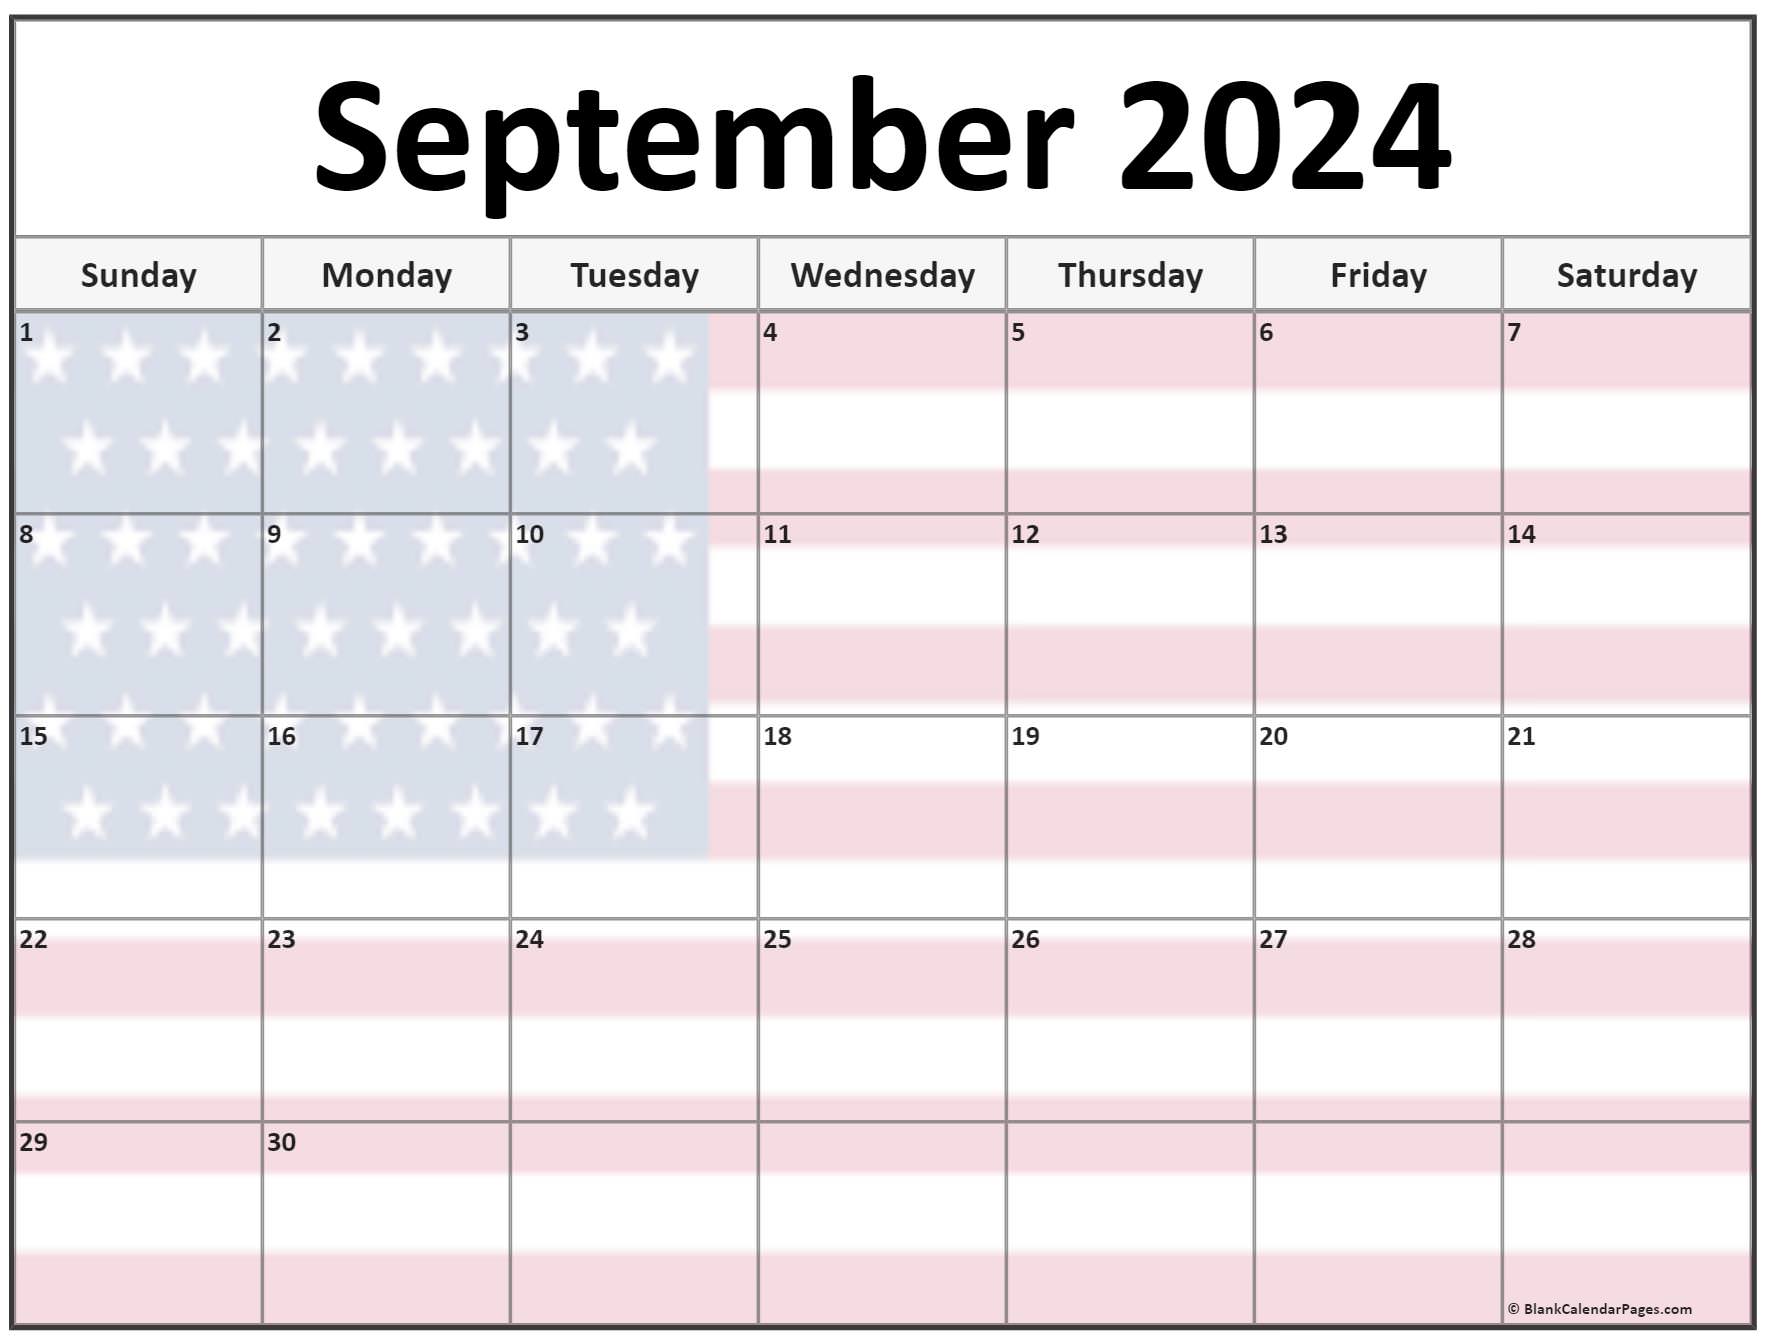 Collection of September 2022 photo calendars with image filters.